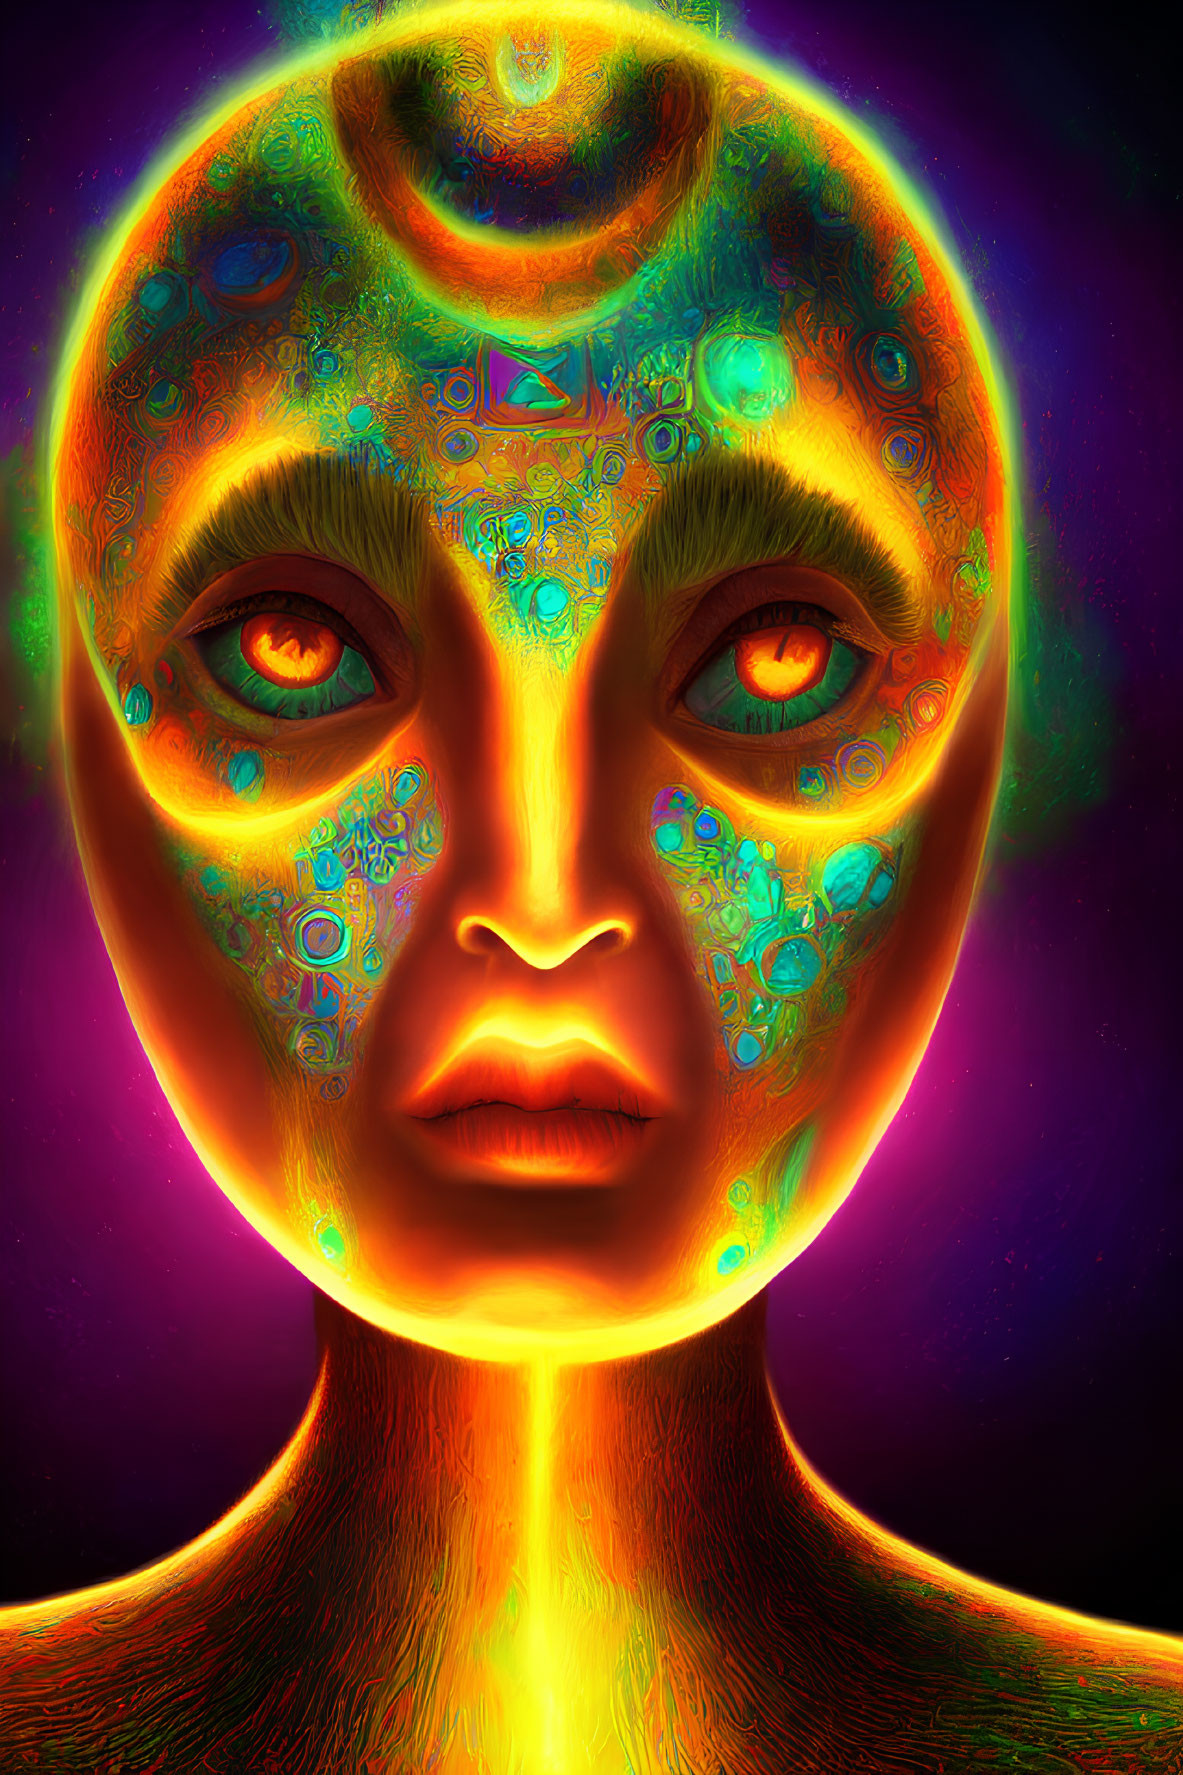 Colorful neon portrait of humanoid figure with glowing red eyes and fiery aura on dark background